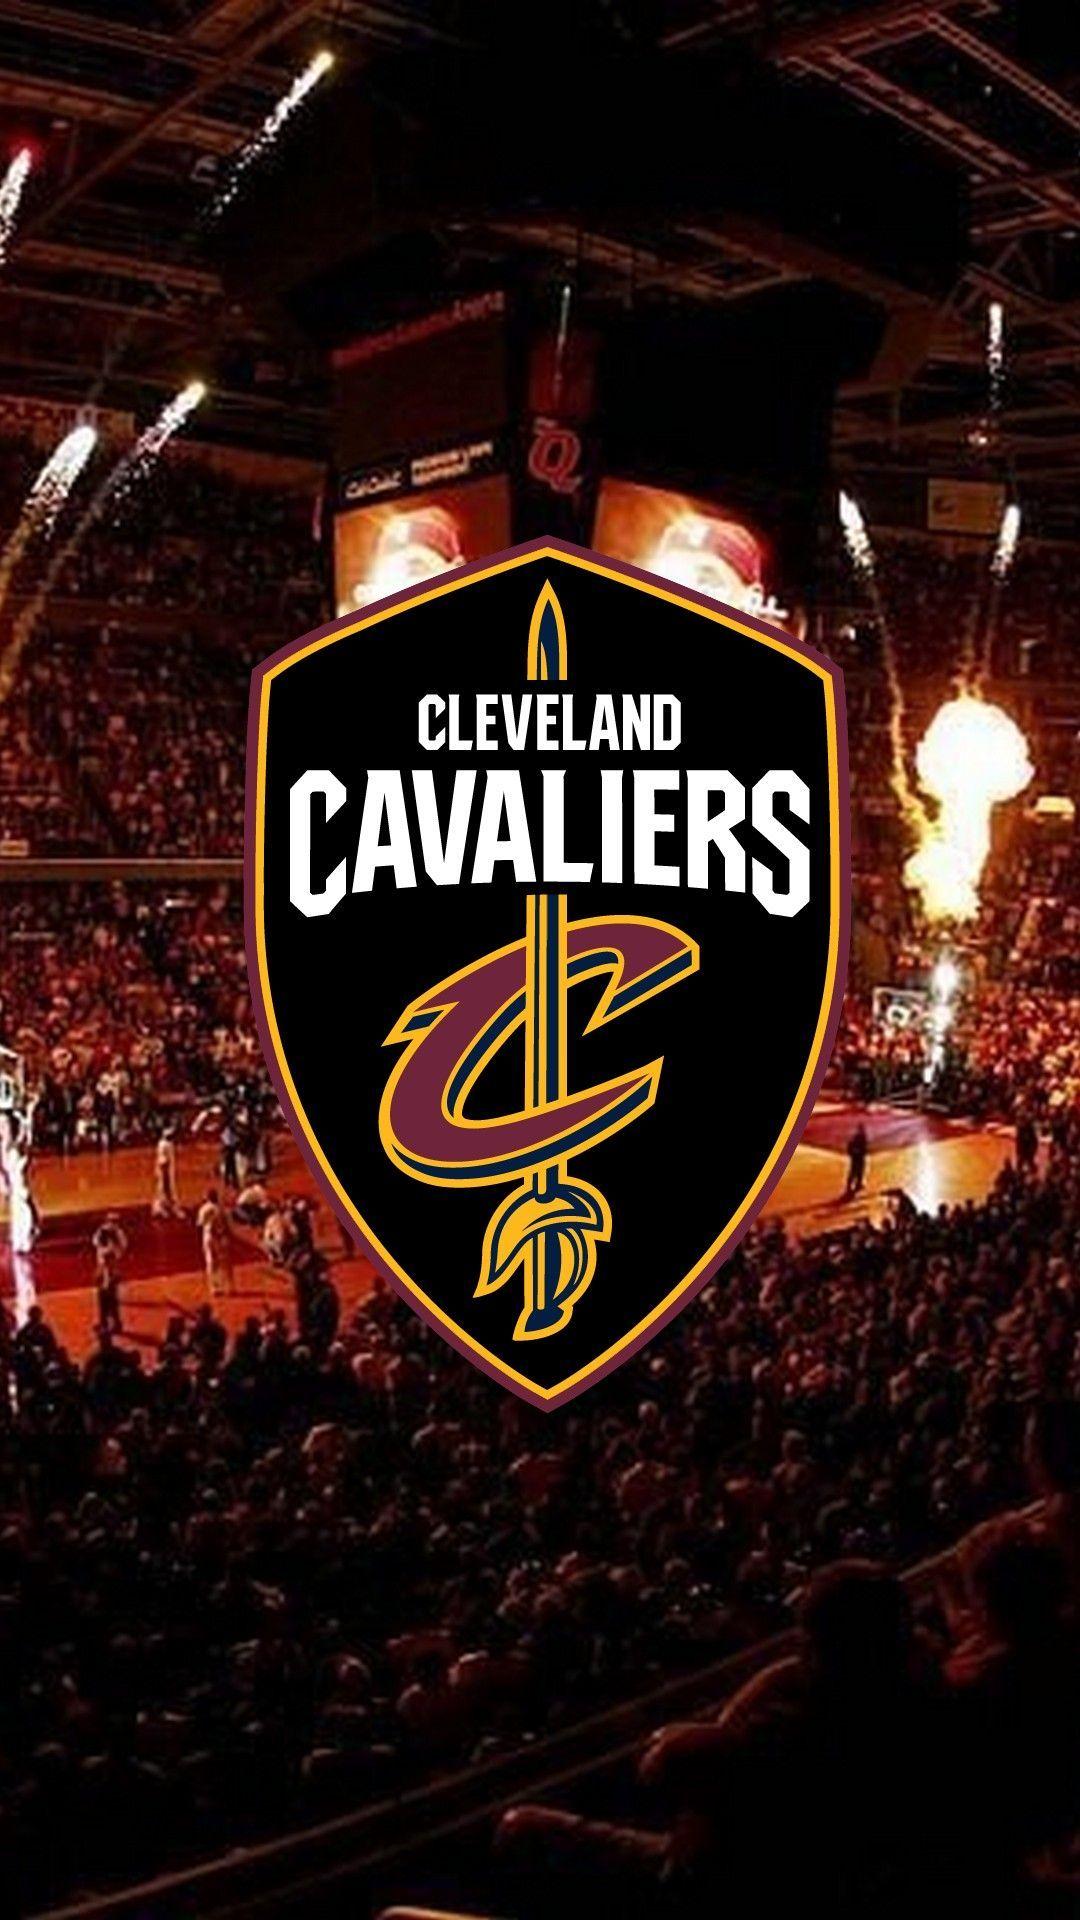 Wallpaper Mobile Cleveland Cavaliers Basketball Wallpaper. Cavaliers wallpaper, Cleveland cavaliers, Cavaliers basketball